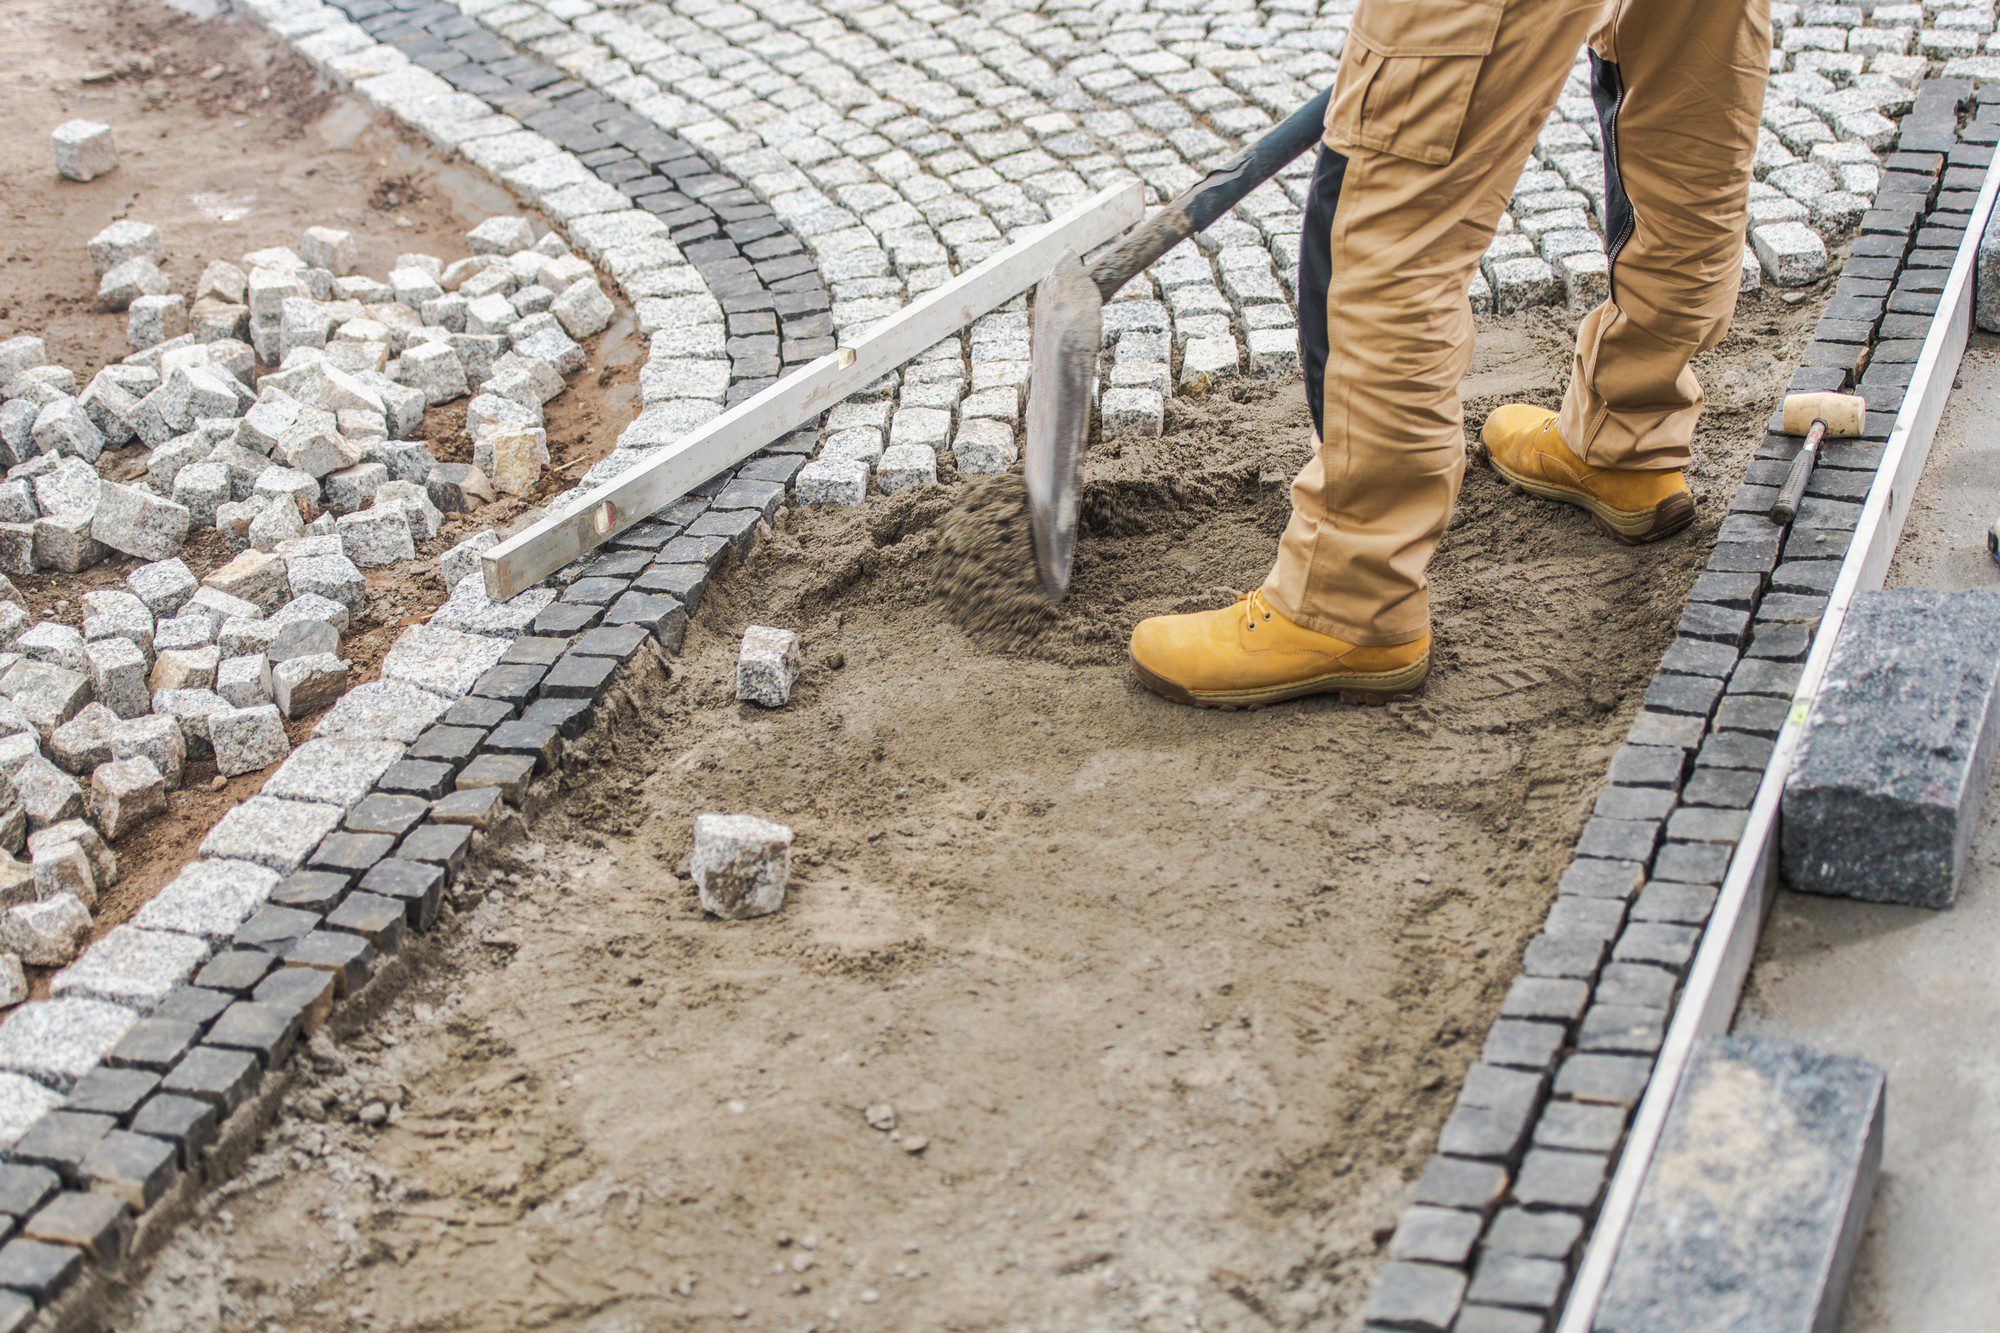 The image shows a person in the process of laying paving stones, also known as pavers, which are being arranged to create a patterned surface, likely a walkway or part of some landscaping work. You can see the person's lower body, wearing beige pants and construction boots, indicative of work attire for this type of labour.The worker is using a shovel to adjust the base layer of what appears to be sand or a fine aggregate, which is essential for leveling and stabilizing the pavers. On the left of the photo, part of the surface is already completed with a neat arrangement of cobblestones following a curved design, while the right side of the photo shows the leveler tool and unfinished area where the groundwork is still visible. The curved plastic edging seems to define the boundary of the paving area. This image captures a moment in the skilled trade of construction and landscaping.